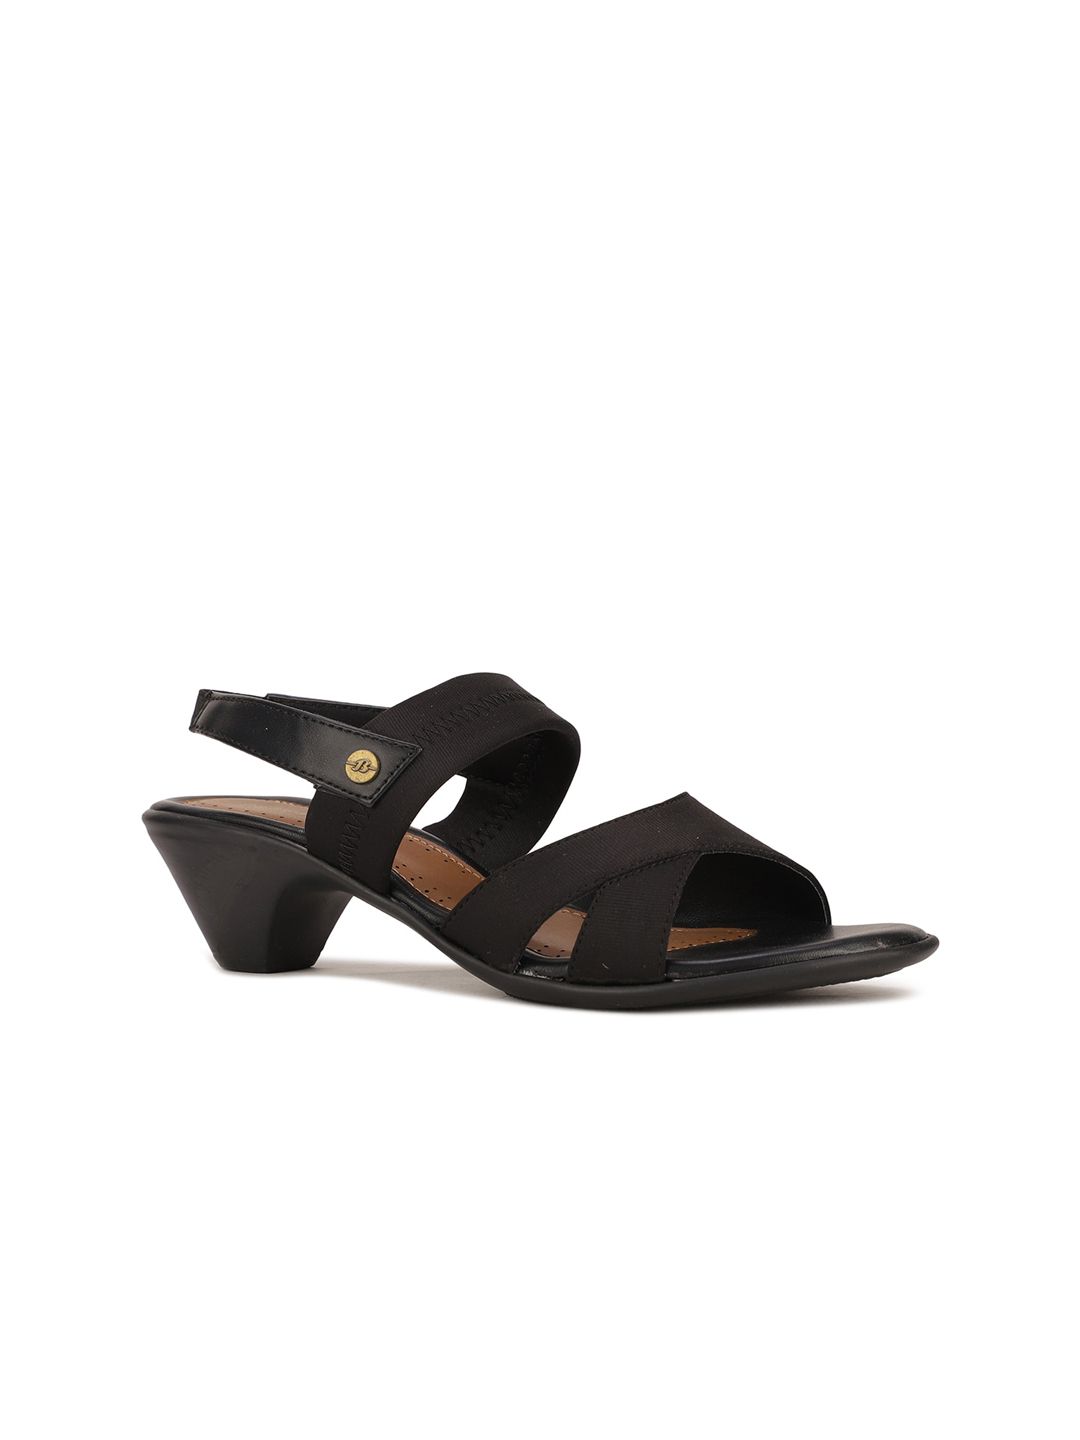 Bata Black PU Block Sandals with Buckles Price in India